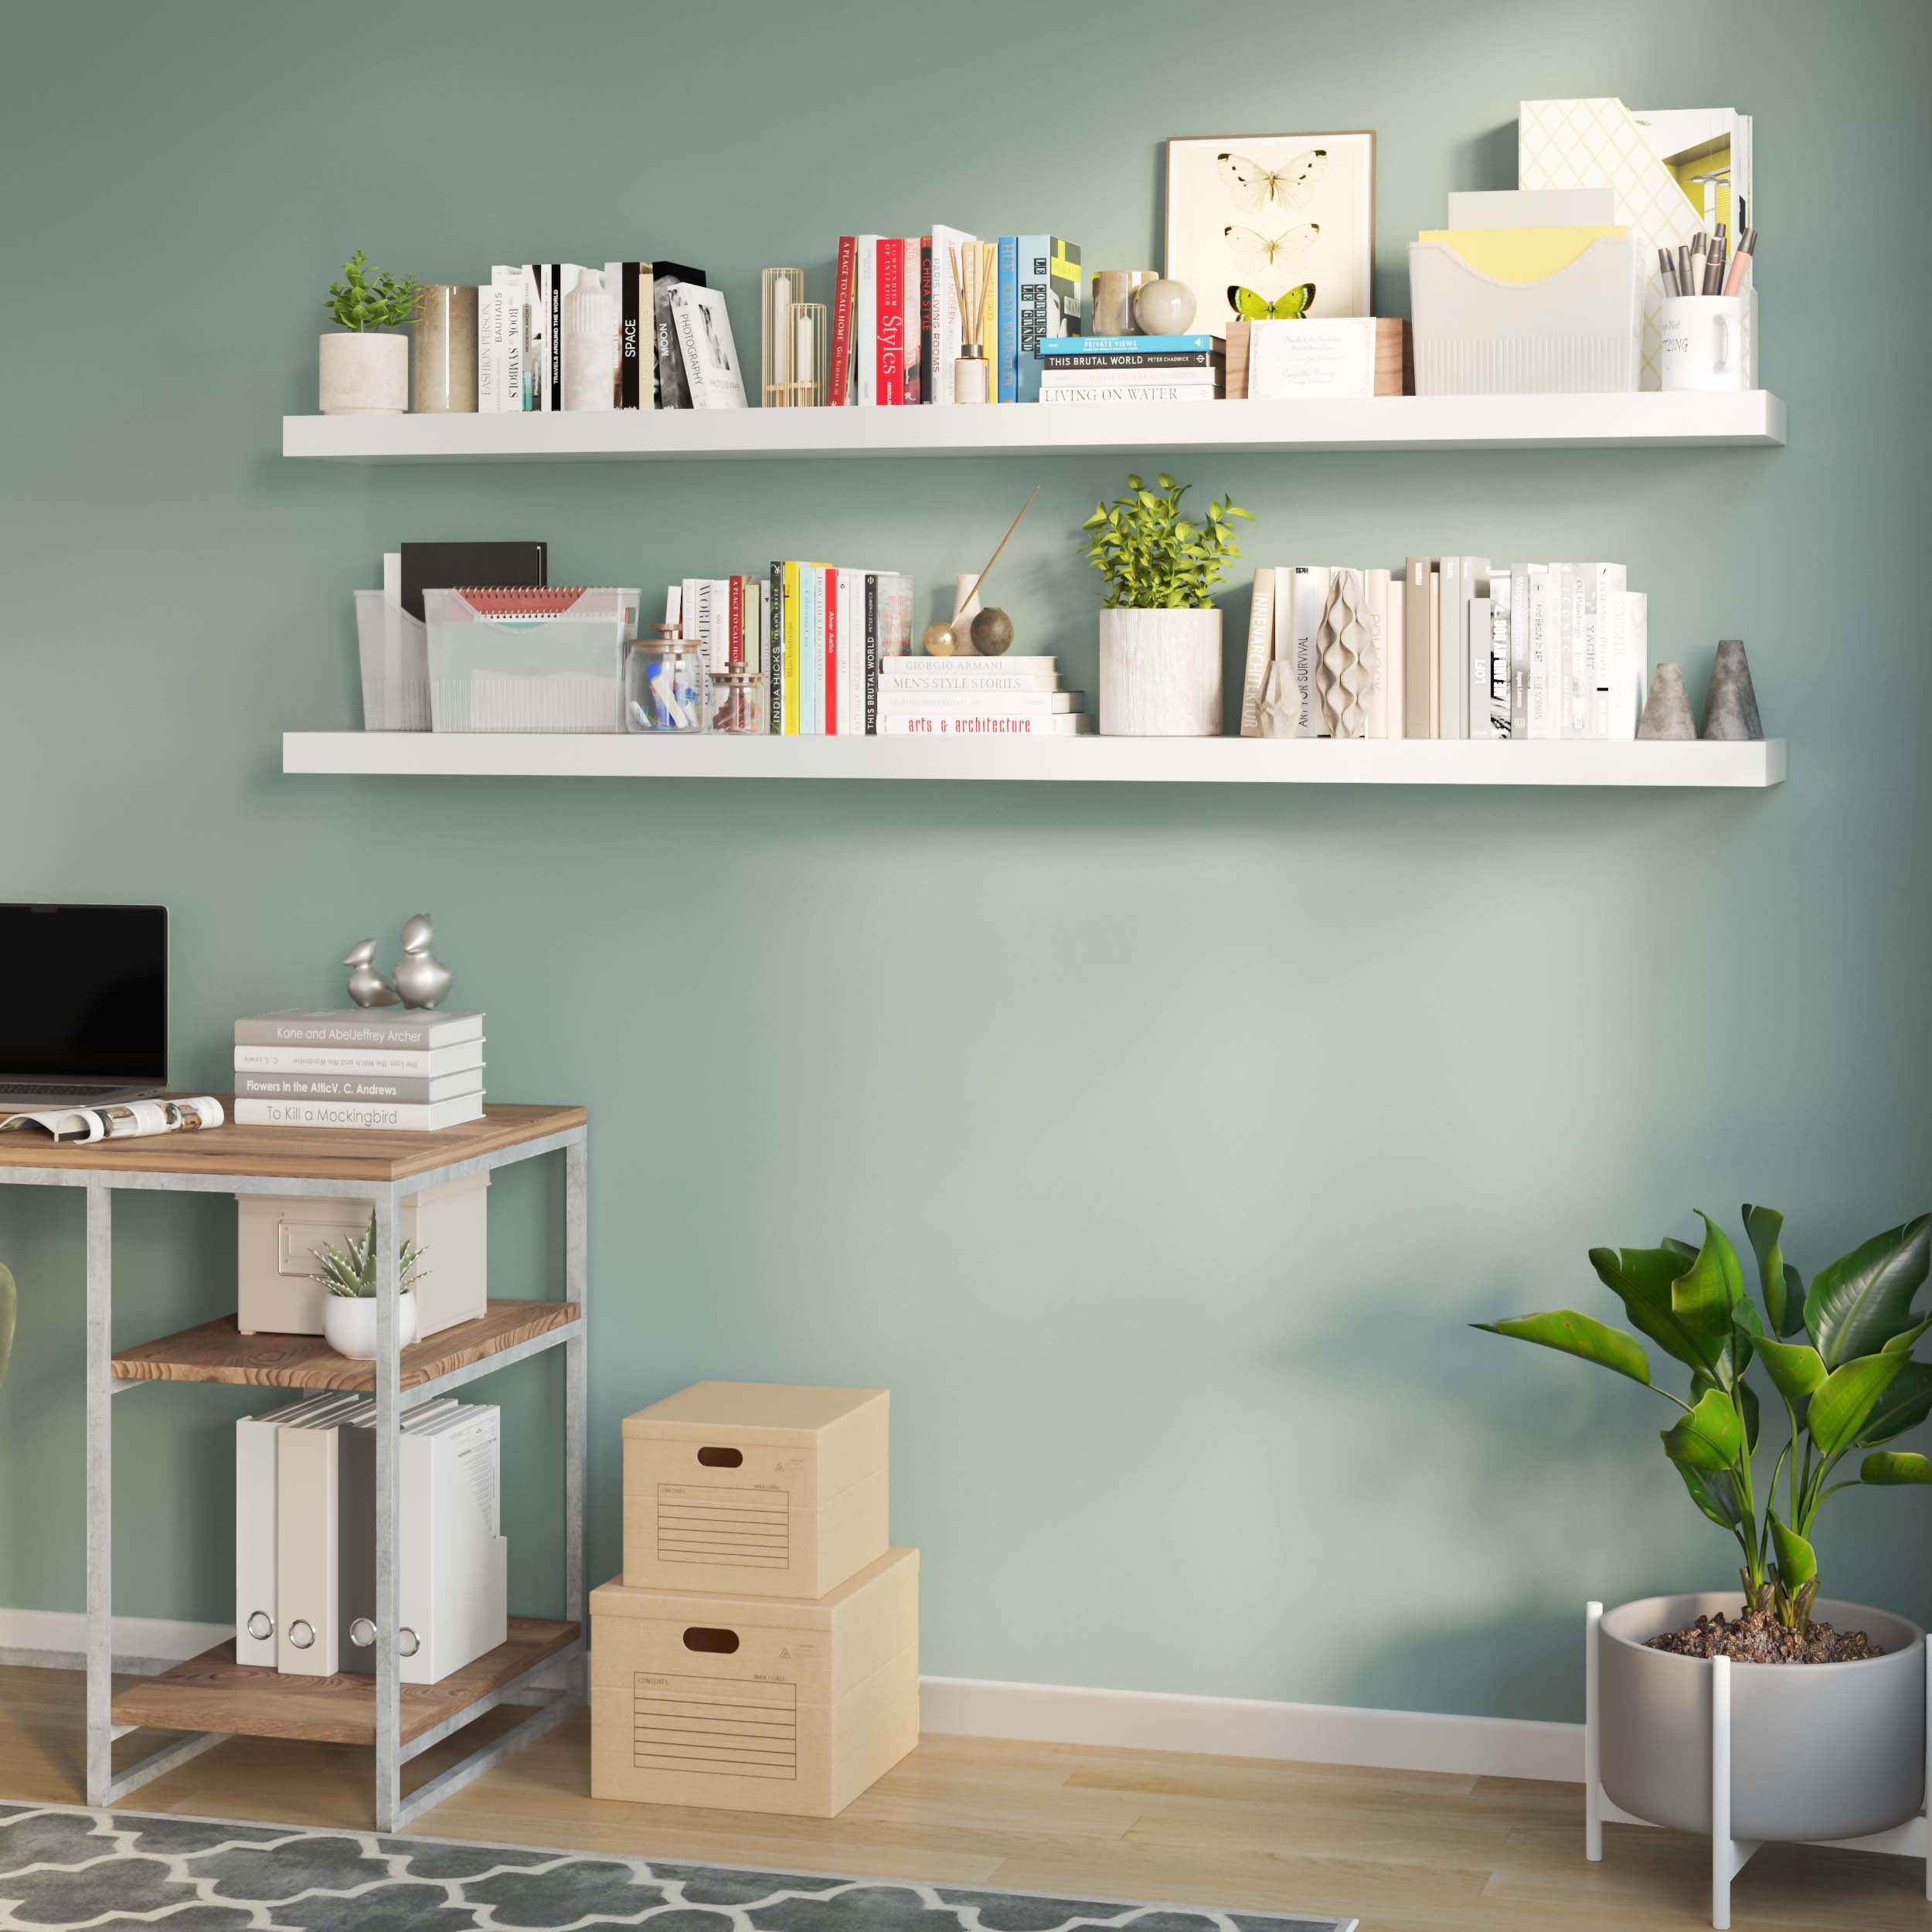 White office shelves for wall neatly lined with books, decorative boxes, and minimalistic decor against a soft green wall.